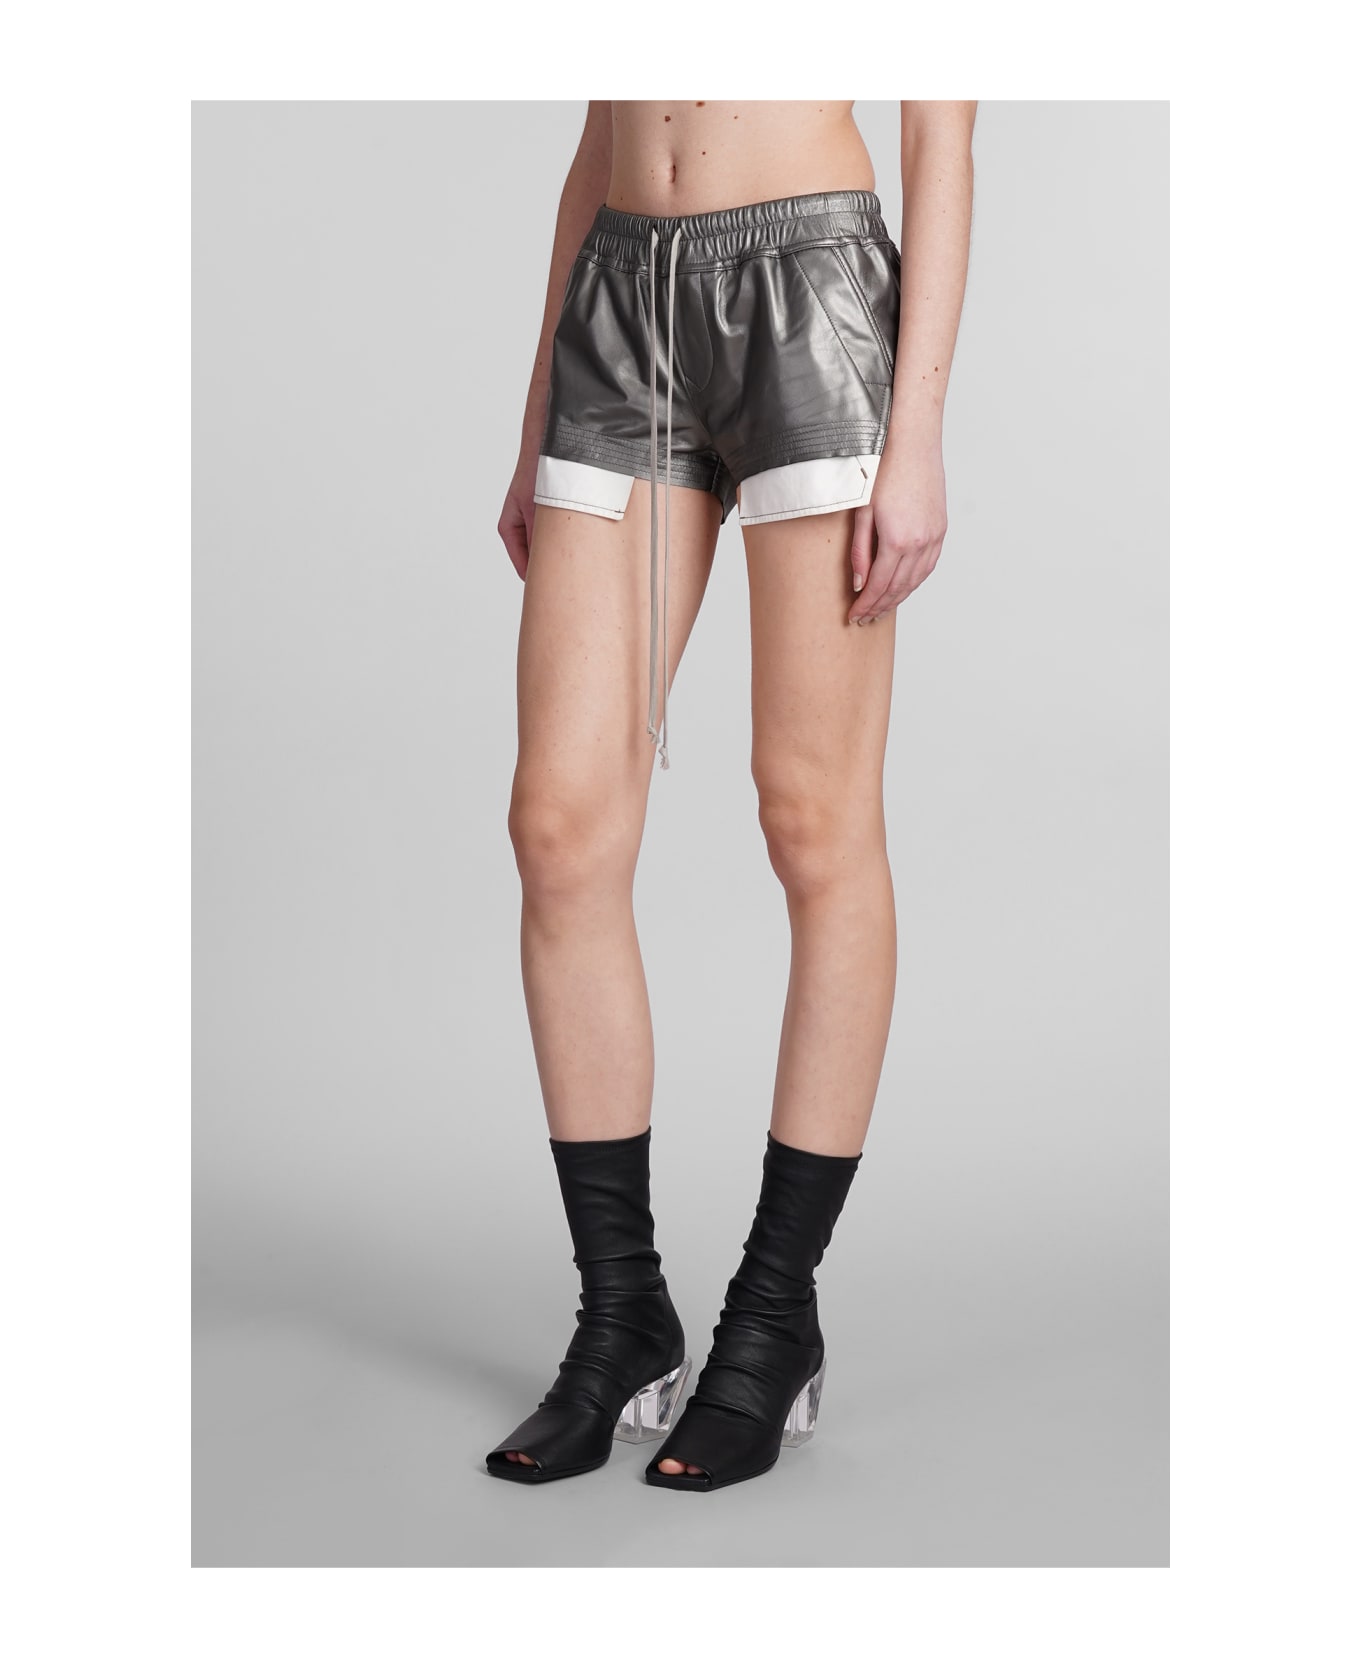 Rick Owens Fog Boxers Shorts In Silver Leather - GUN METAL 